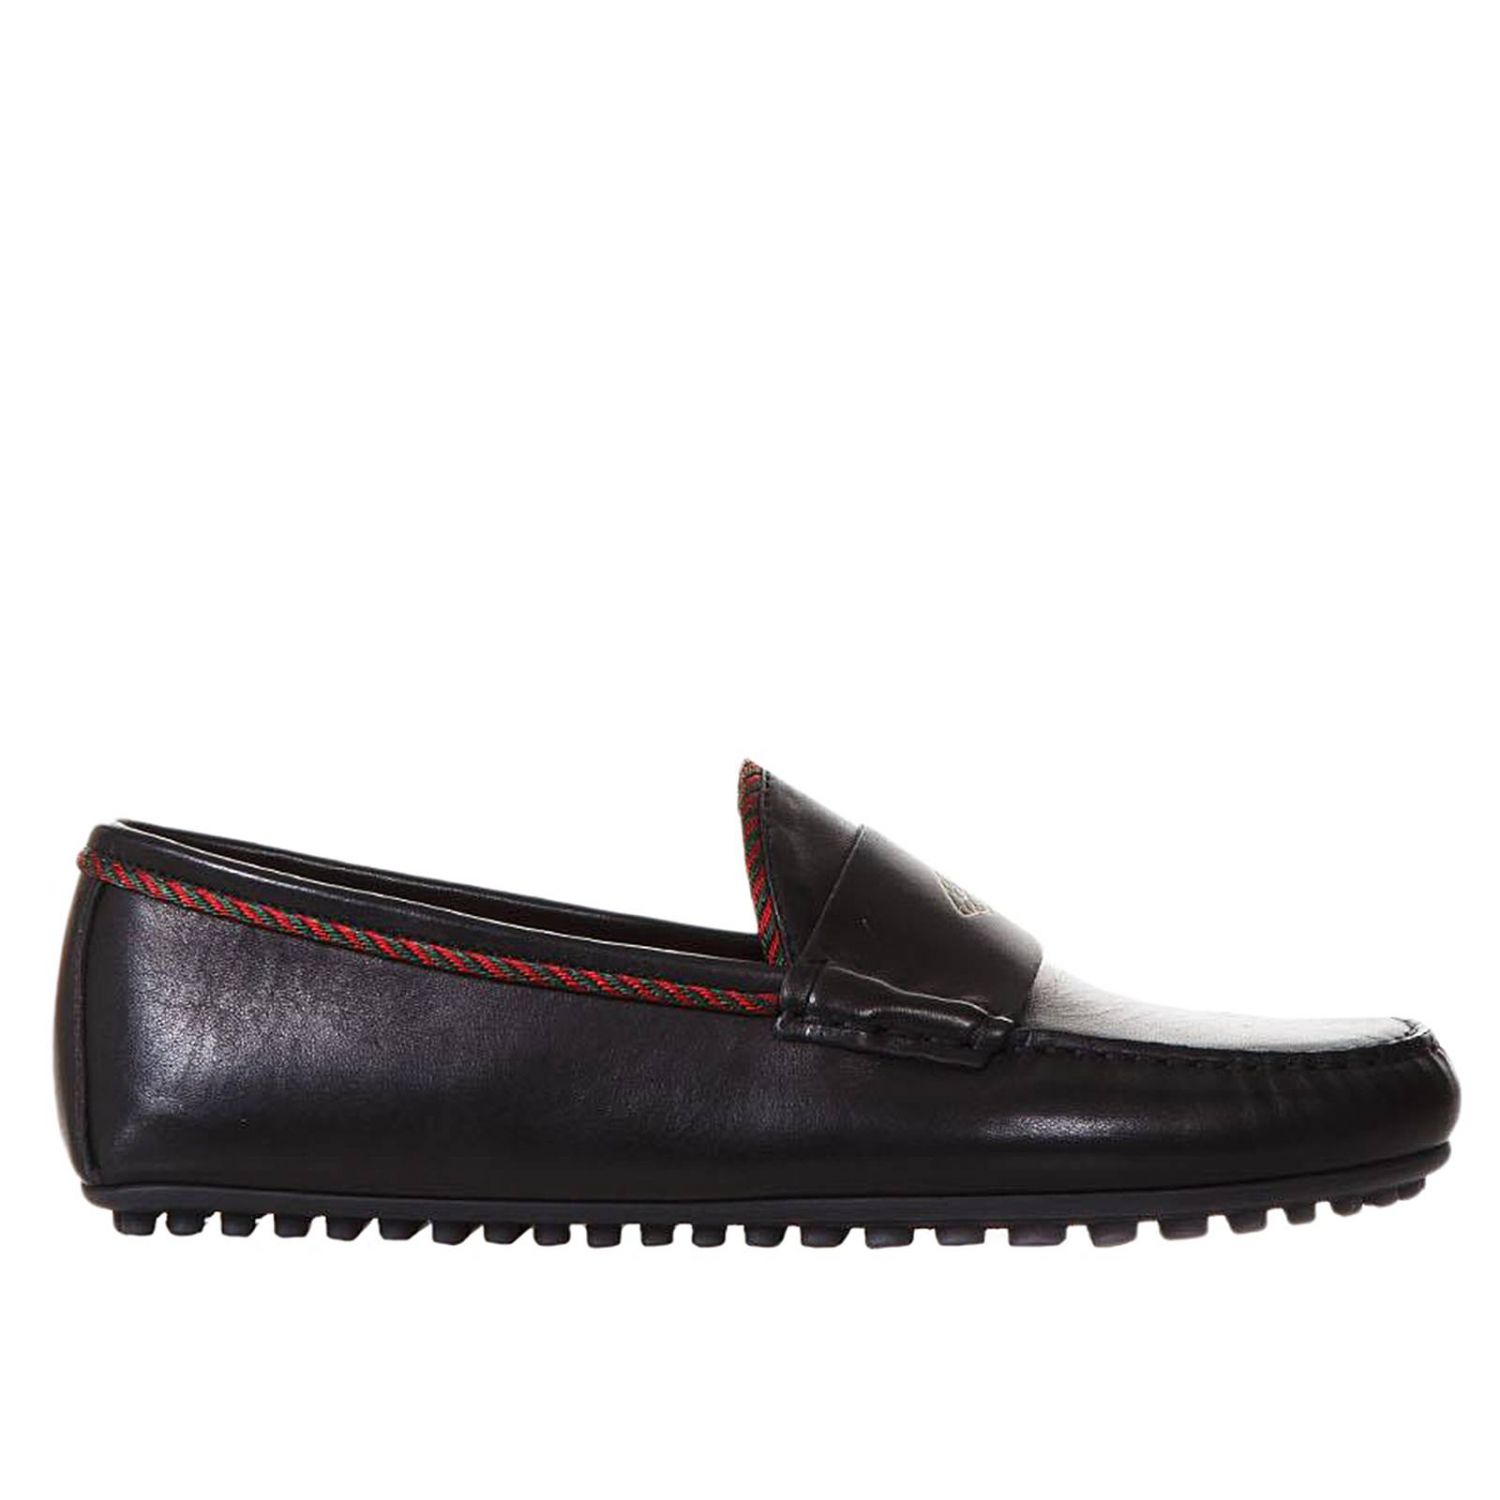 Loafers men Gucci | Loafers Gucci Men Black | Loafers Gucci 497117 ...